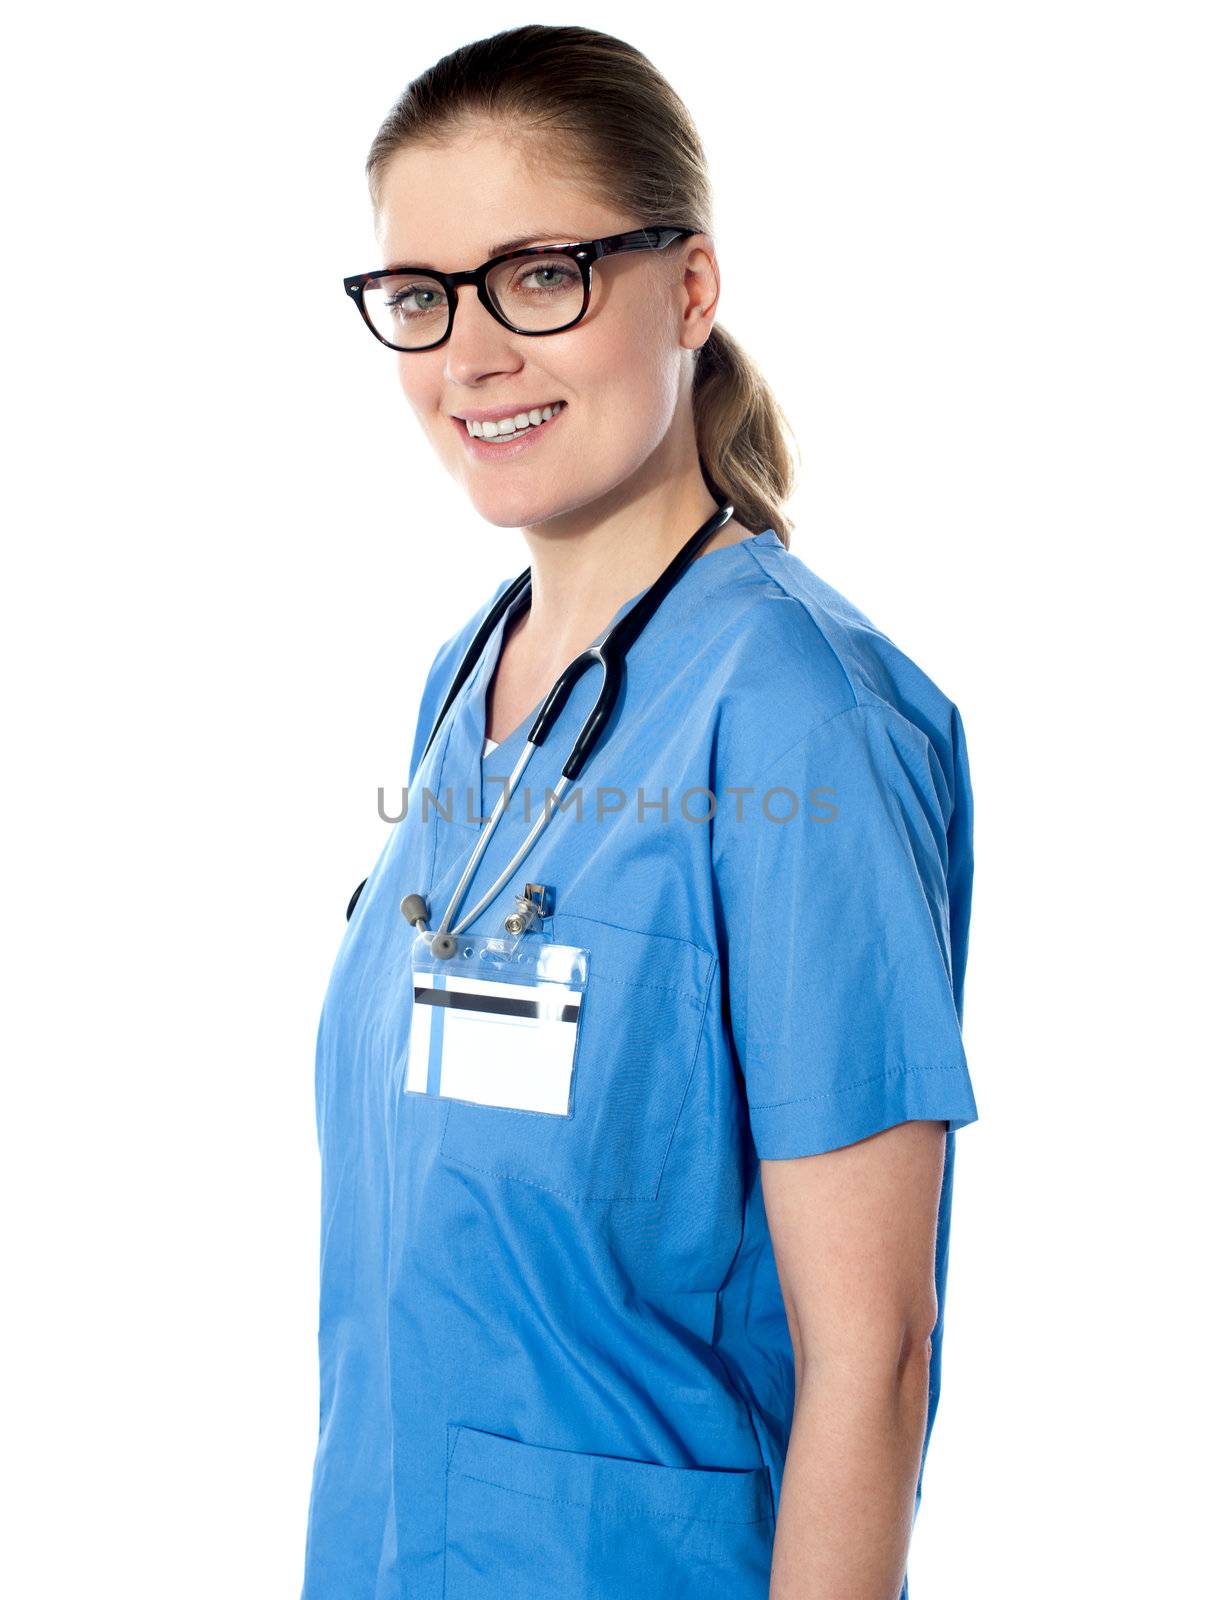 Image of an exprienced physician, stethoscope around her neck